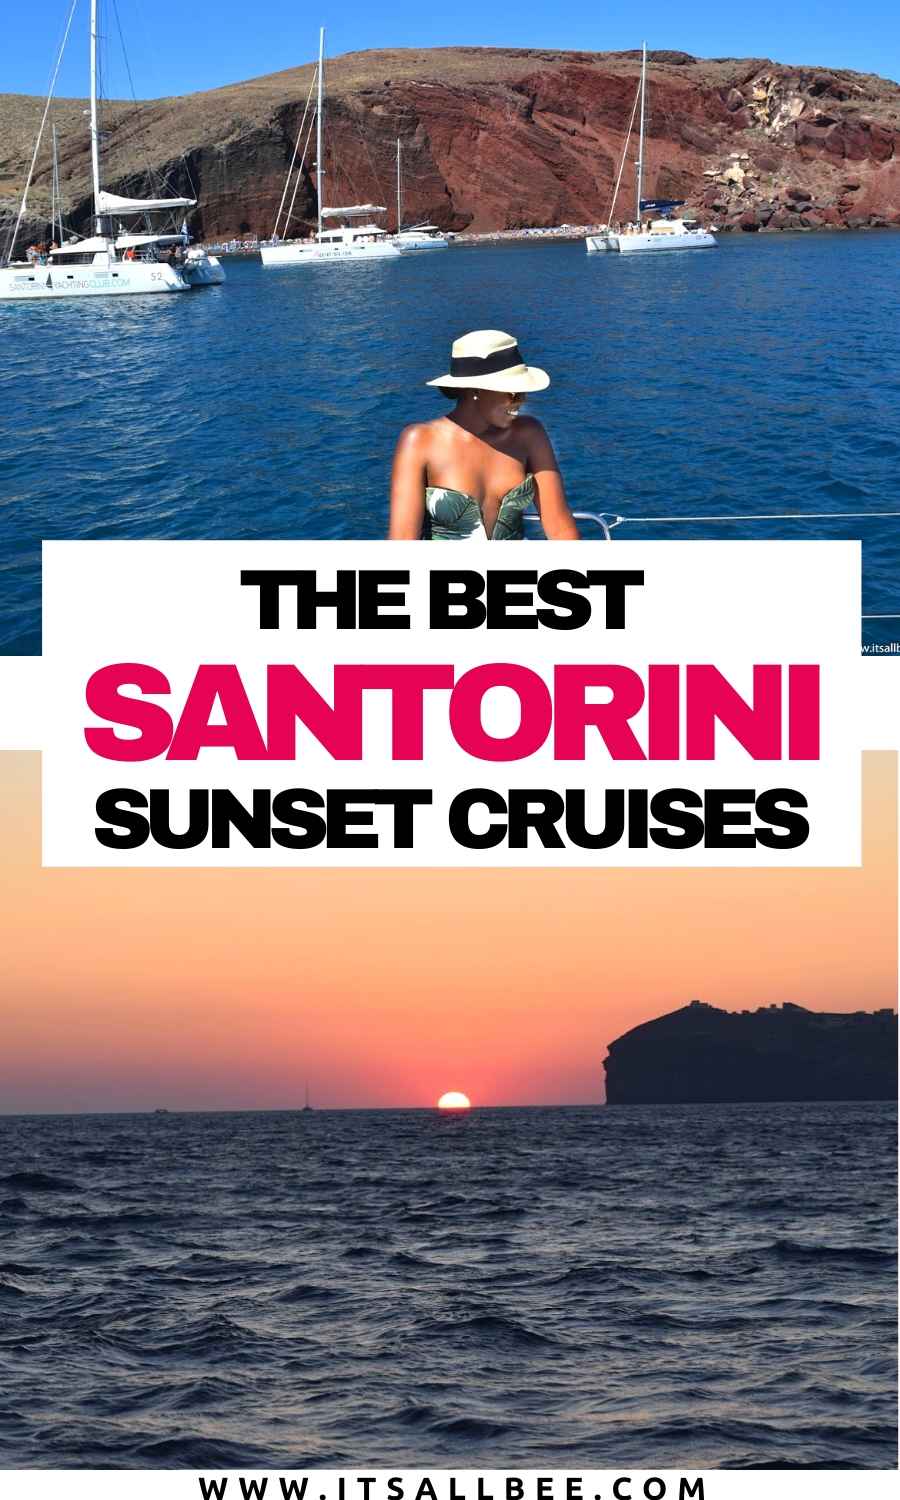 Complete guide to not only the best santorini boat tours